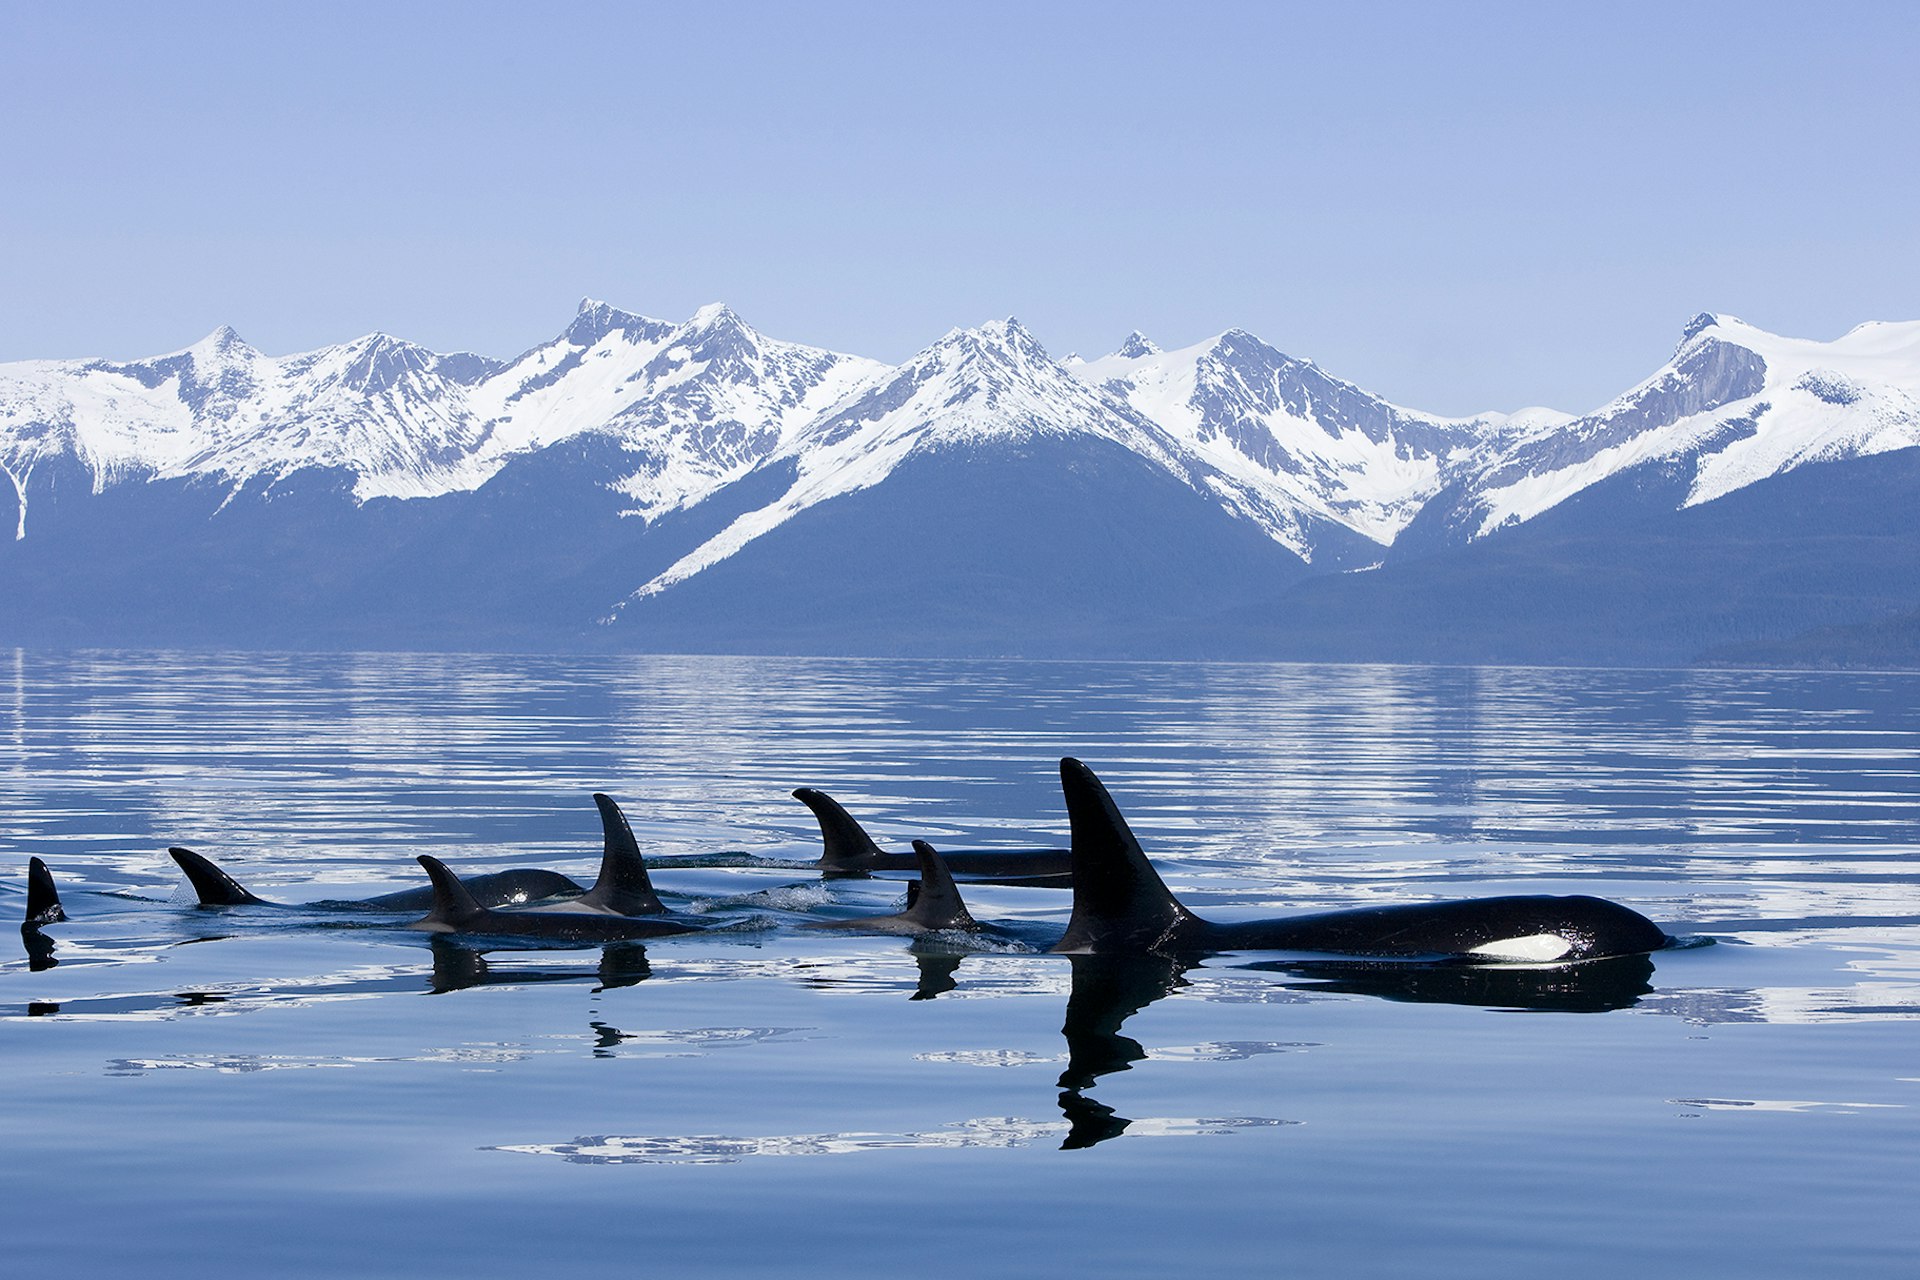 Orcas are a common sight in the waters off Alaska. Image by John Hyde / Perspectives / Getty